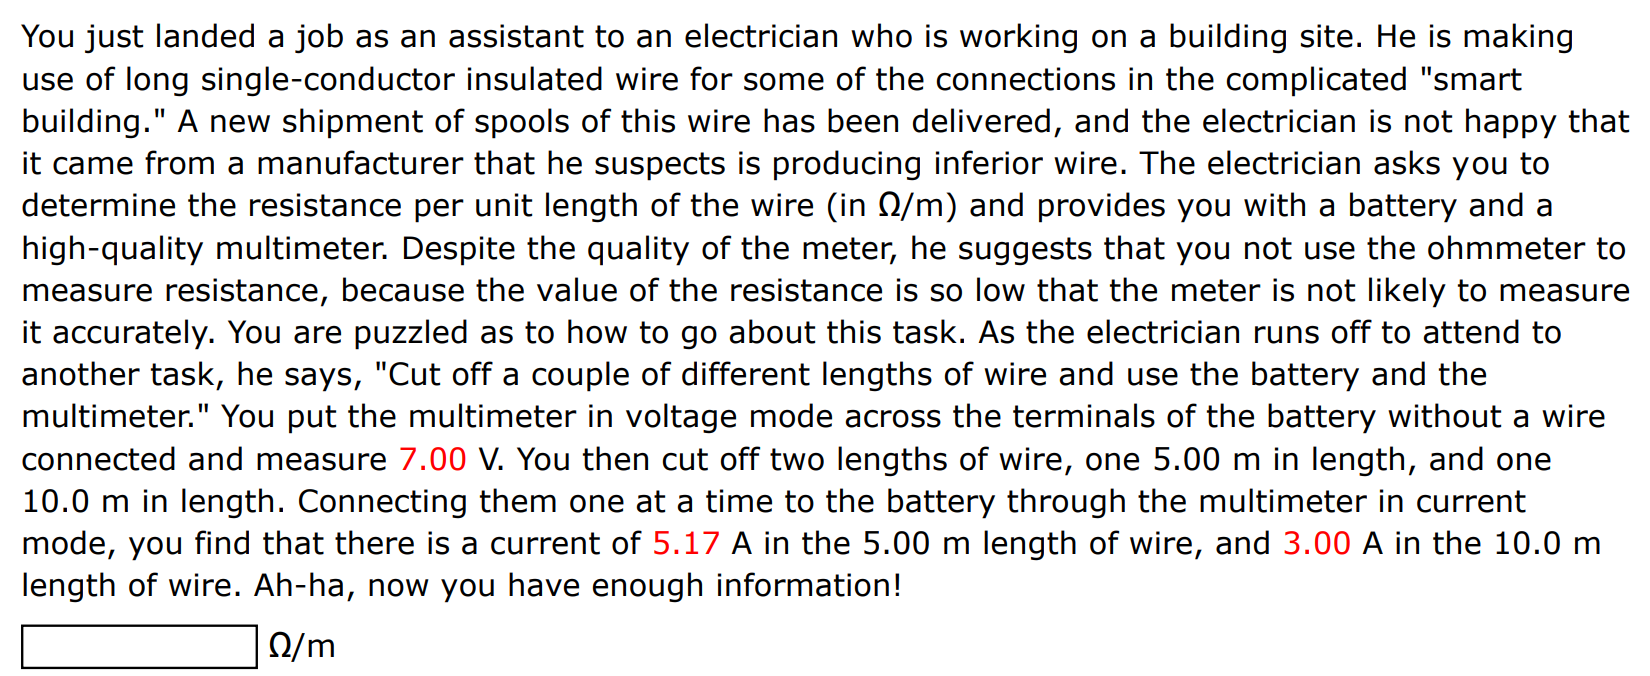 You just landed a job as an assistant to an electrician who is working on a building site. He is making use of long single-conductor insulated wire for some of the connections in the complicated "smart building." A new shipment of spools of this wire has been delivered, and the electrician is not happy that it came from a manufacturer that he suspects is producing inferior wire. The electrician asks you to determine the resistance per unit length of the wire (in Ω/m ) and provides you with a battery and a high-quality multimeter. Despite the quality of the meter, he suggests that you not use the ohmmeter to measure resistance, because the value of the resistance is so low that the meter is not likely to measure it accurately. You are puzzled as to how to go about this task. As the electrician runs off to attend to another task, he says, "Cut off a couple of different lengths of wire and use the battery and the multimeter. " You put the multimeter in voltage mode across the terminals of the battery without a wire connected and measure 7.00 V. You then cut off two lengths of wire, one 5.00 m in length, and one 10.0 m in length. Connecting them one at a time to the battery through the multimeter in current mode, you find that there is a current of 5.17 A in the 5.00 m length of wire, and 3.00 A in the 10.0 m length of wire. Ah-ha, now you have enough information! Ω/m